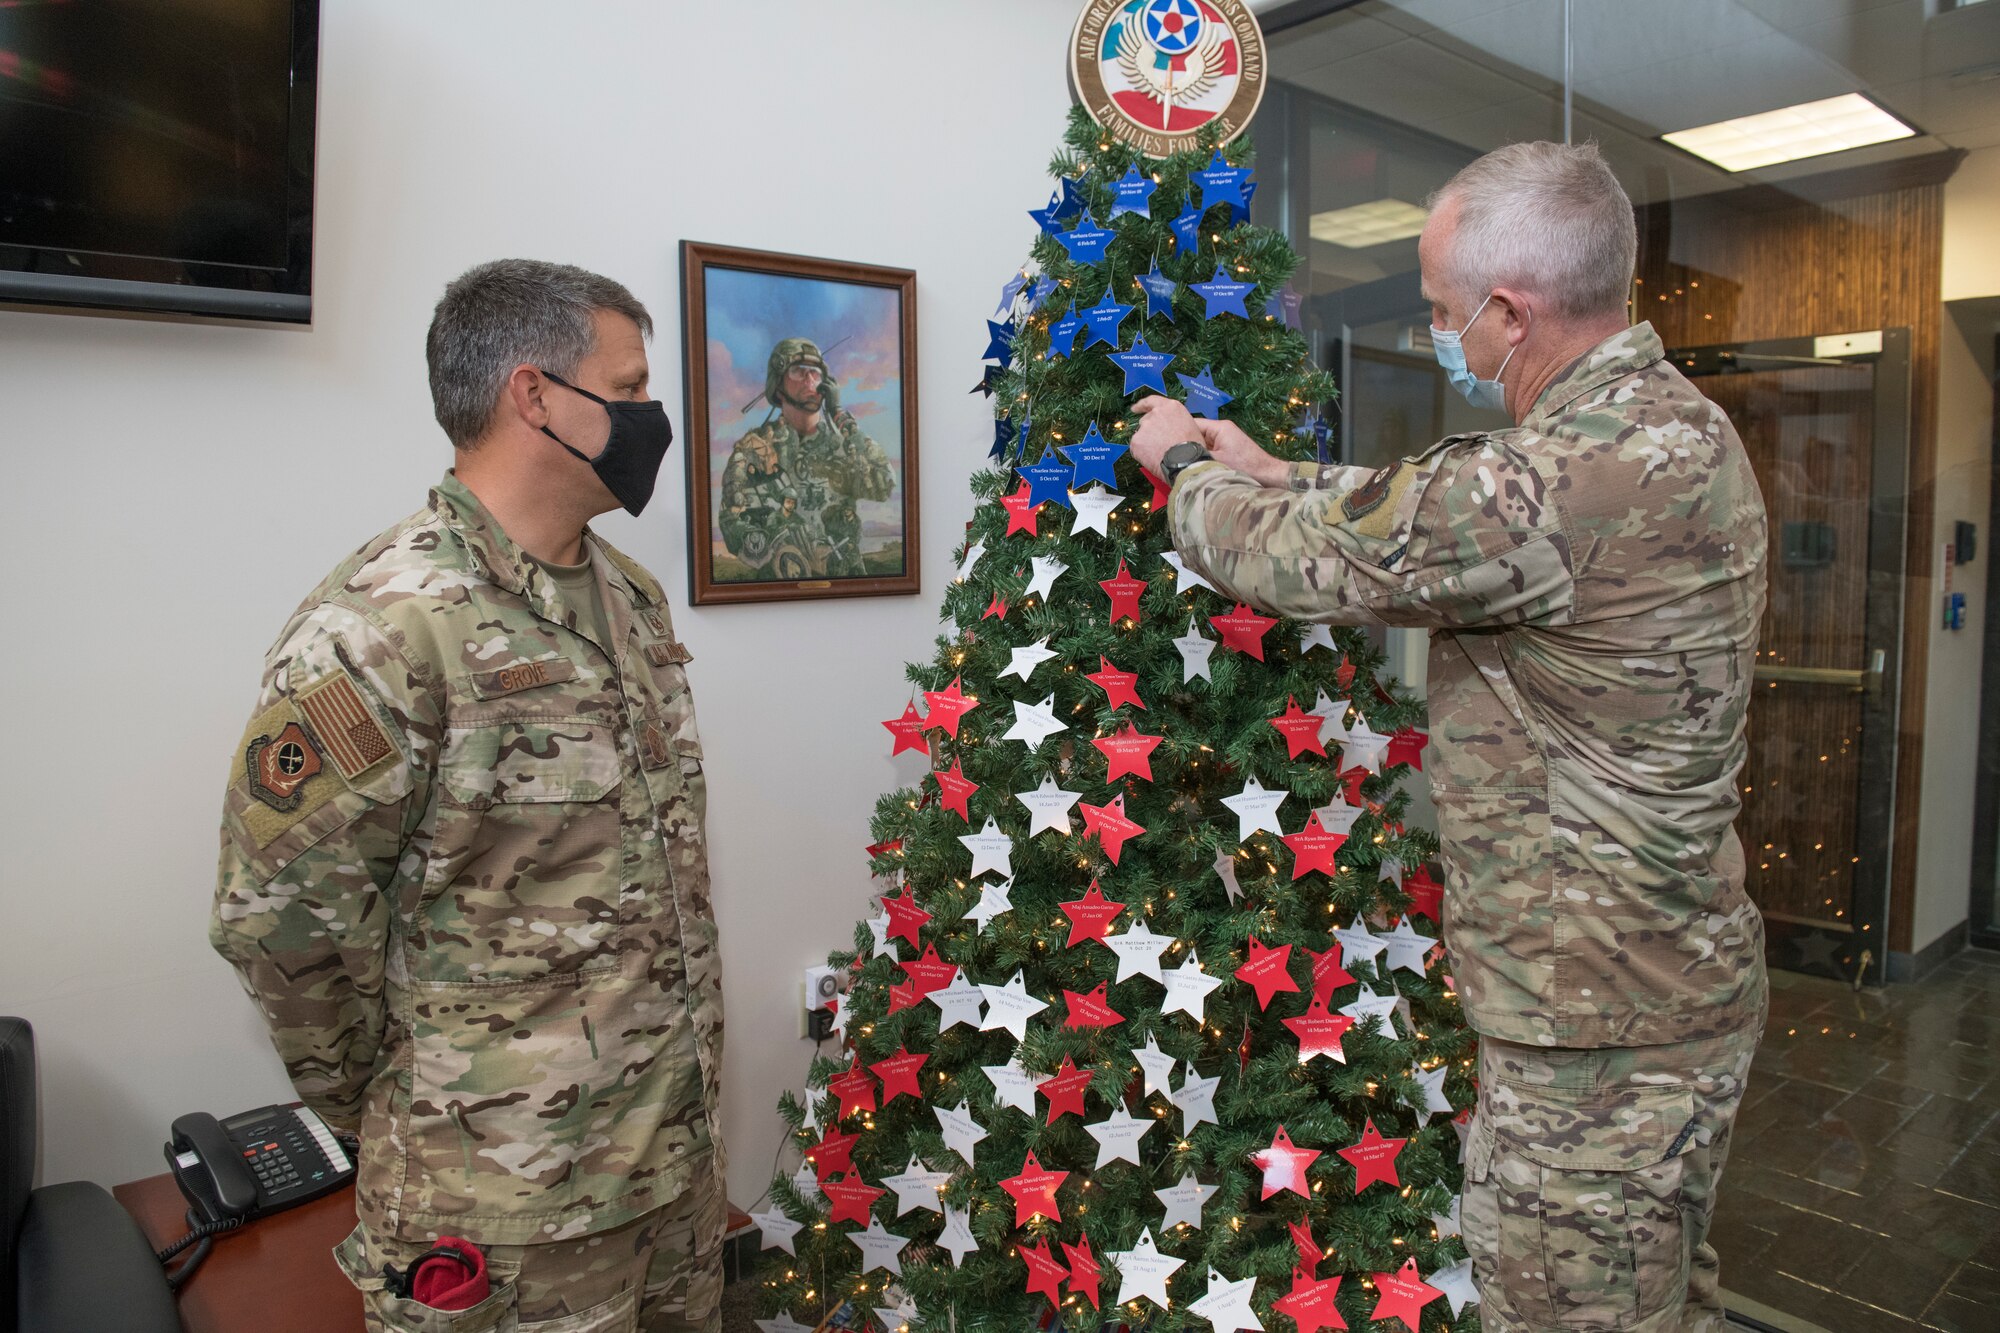 U.S. Air Force Col. Matthew Allen, commander of the 24th Special Operations Wing, places a star on an Honor Tree